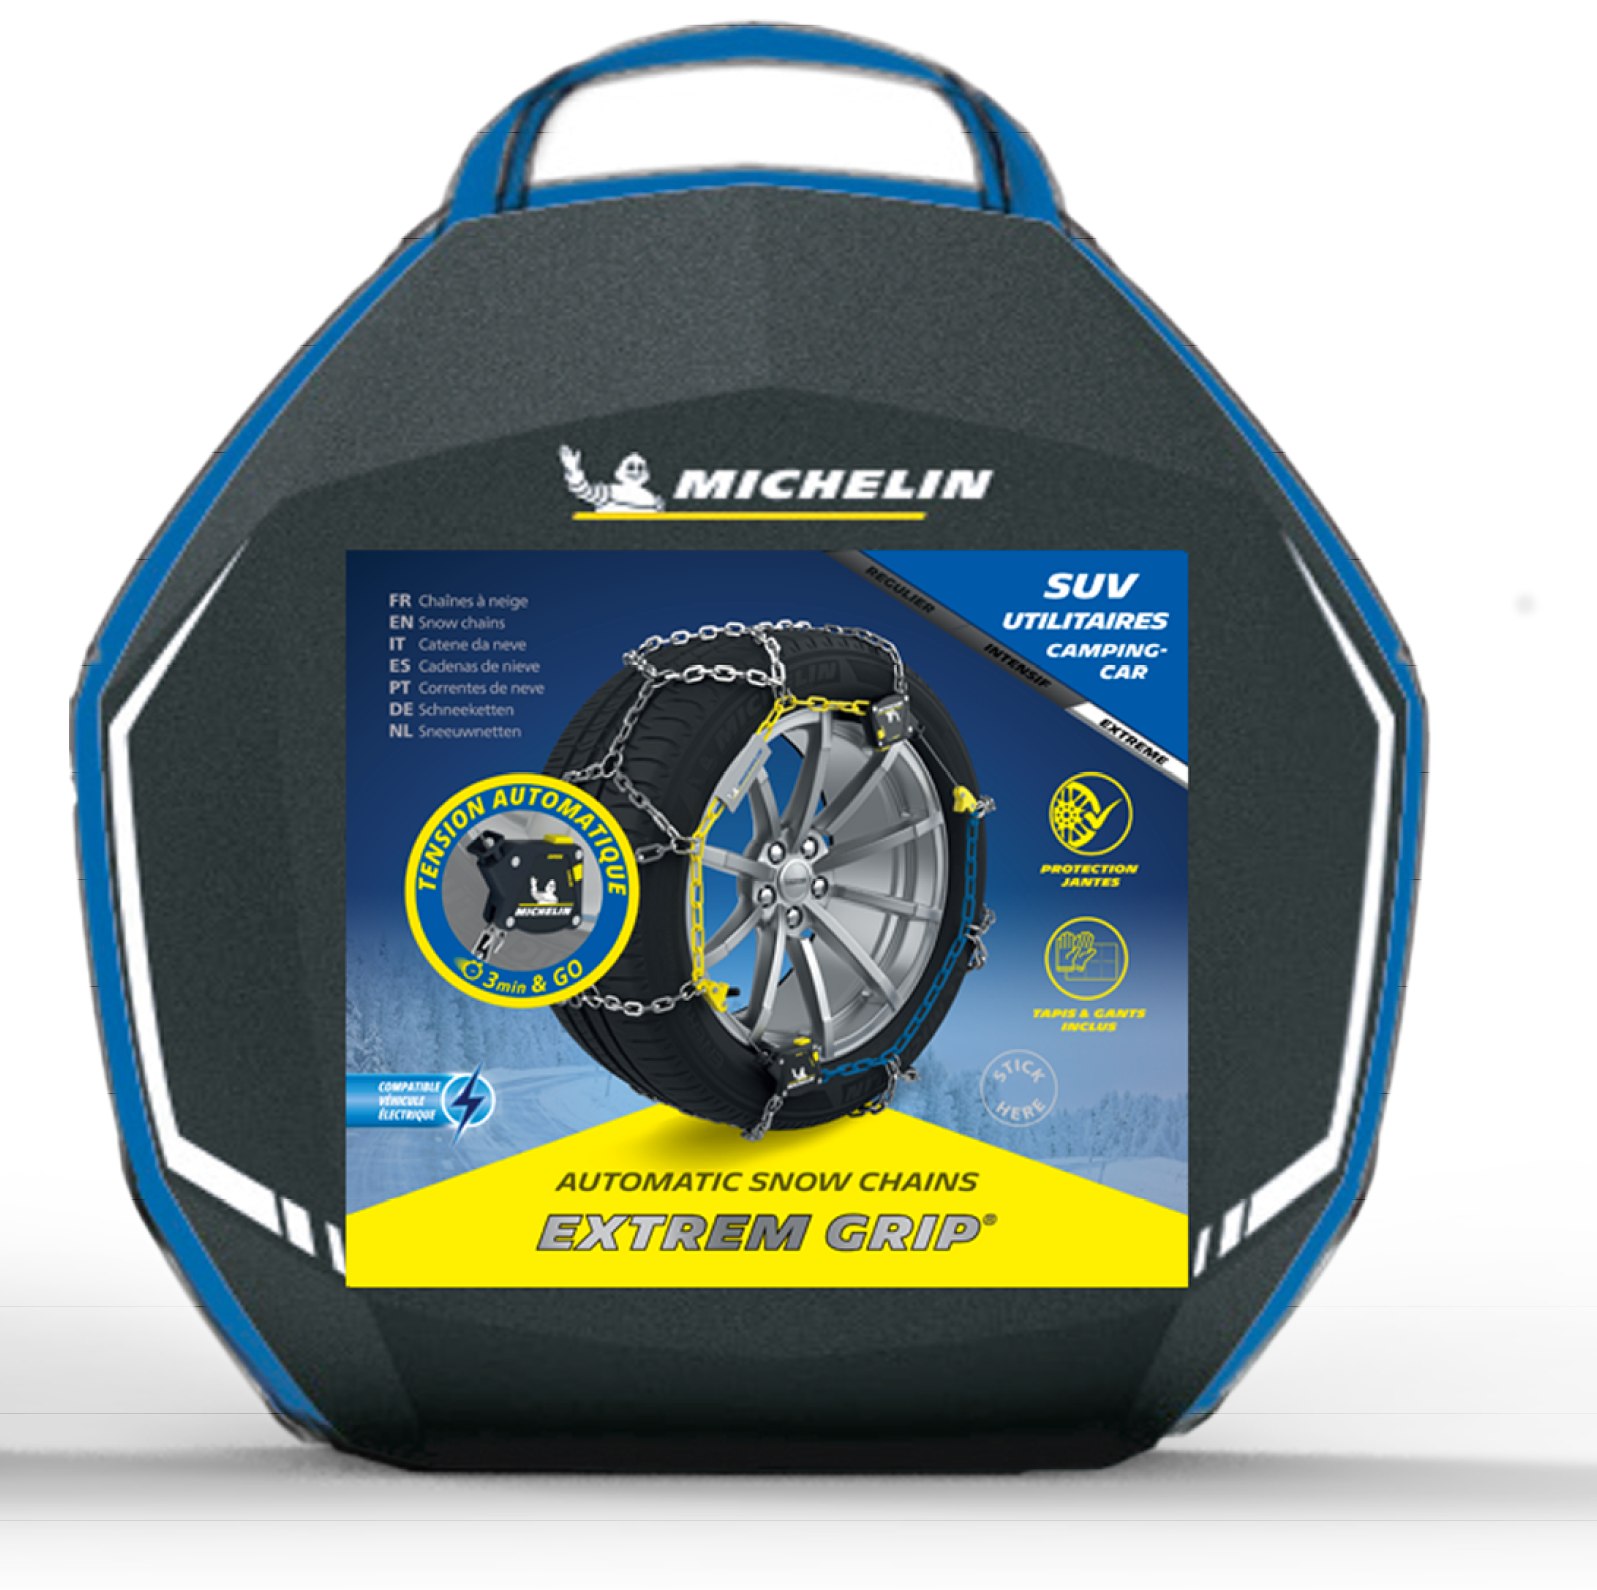 MICHELIN Extrem Grip® automatic snow chains